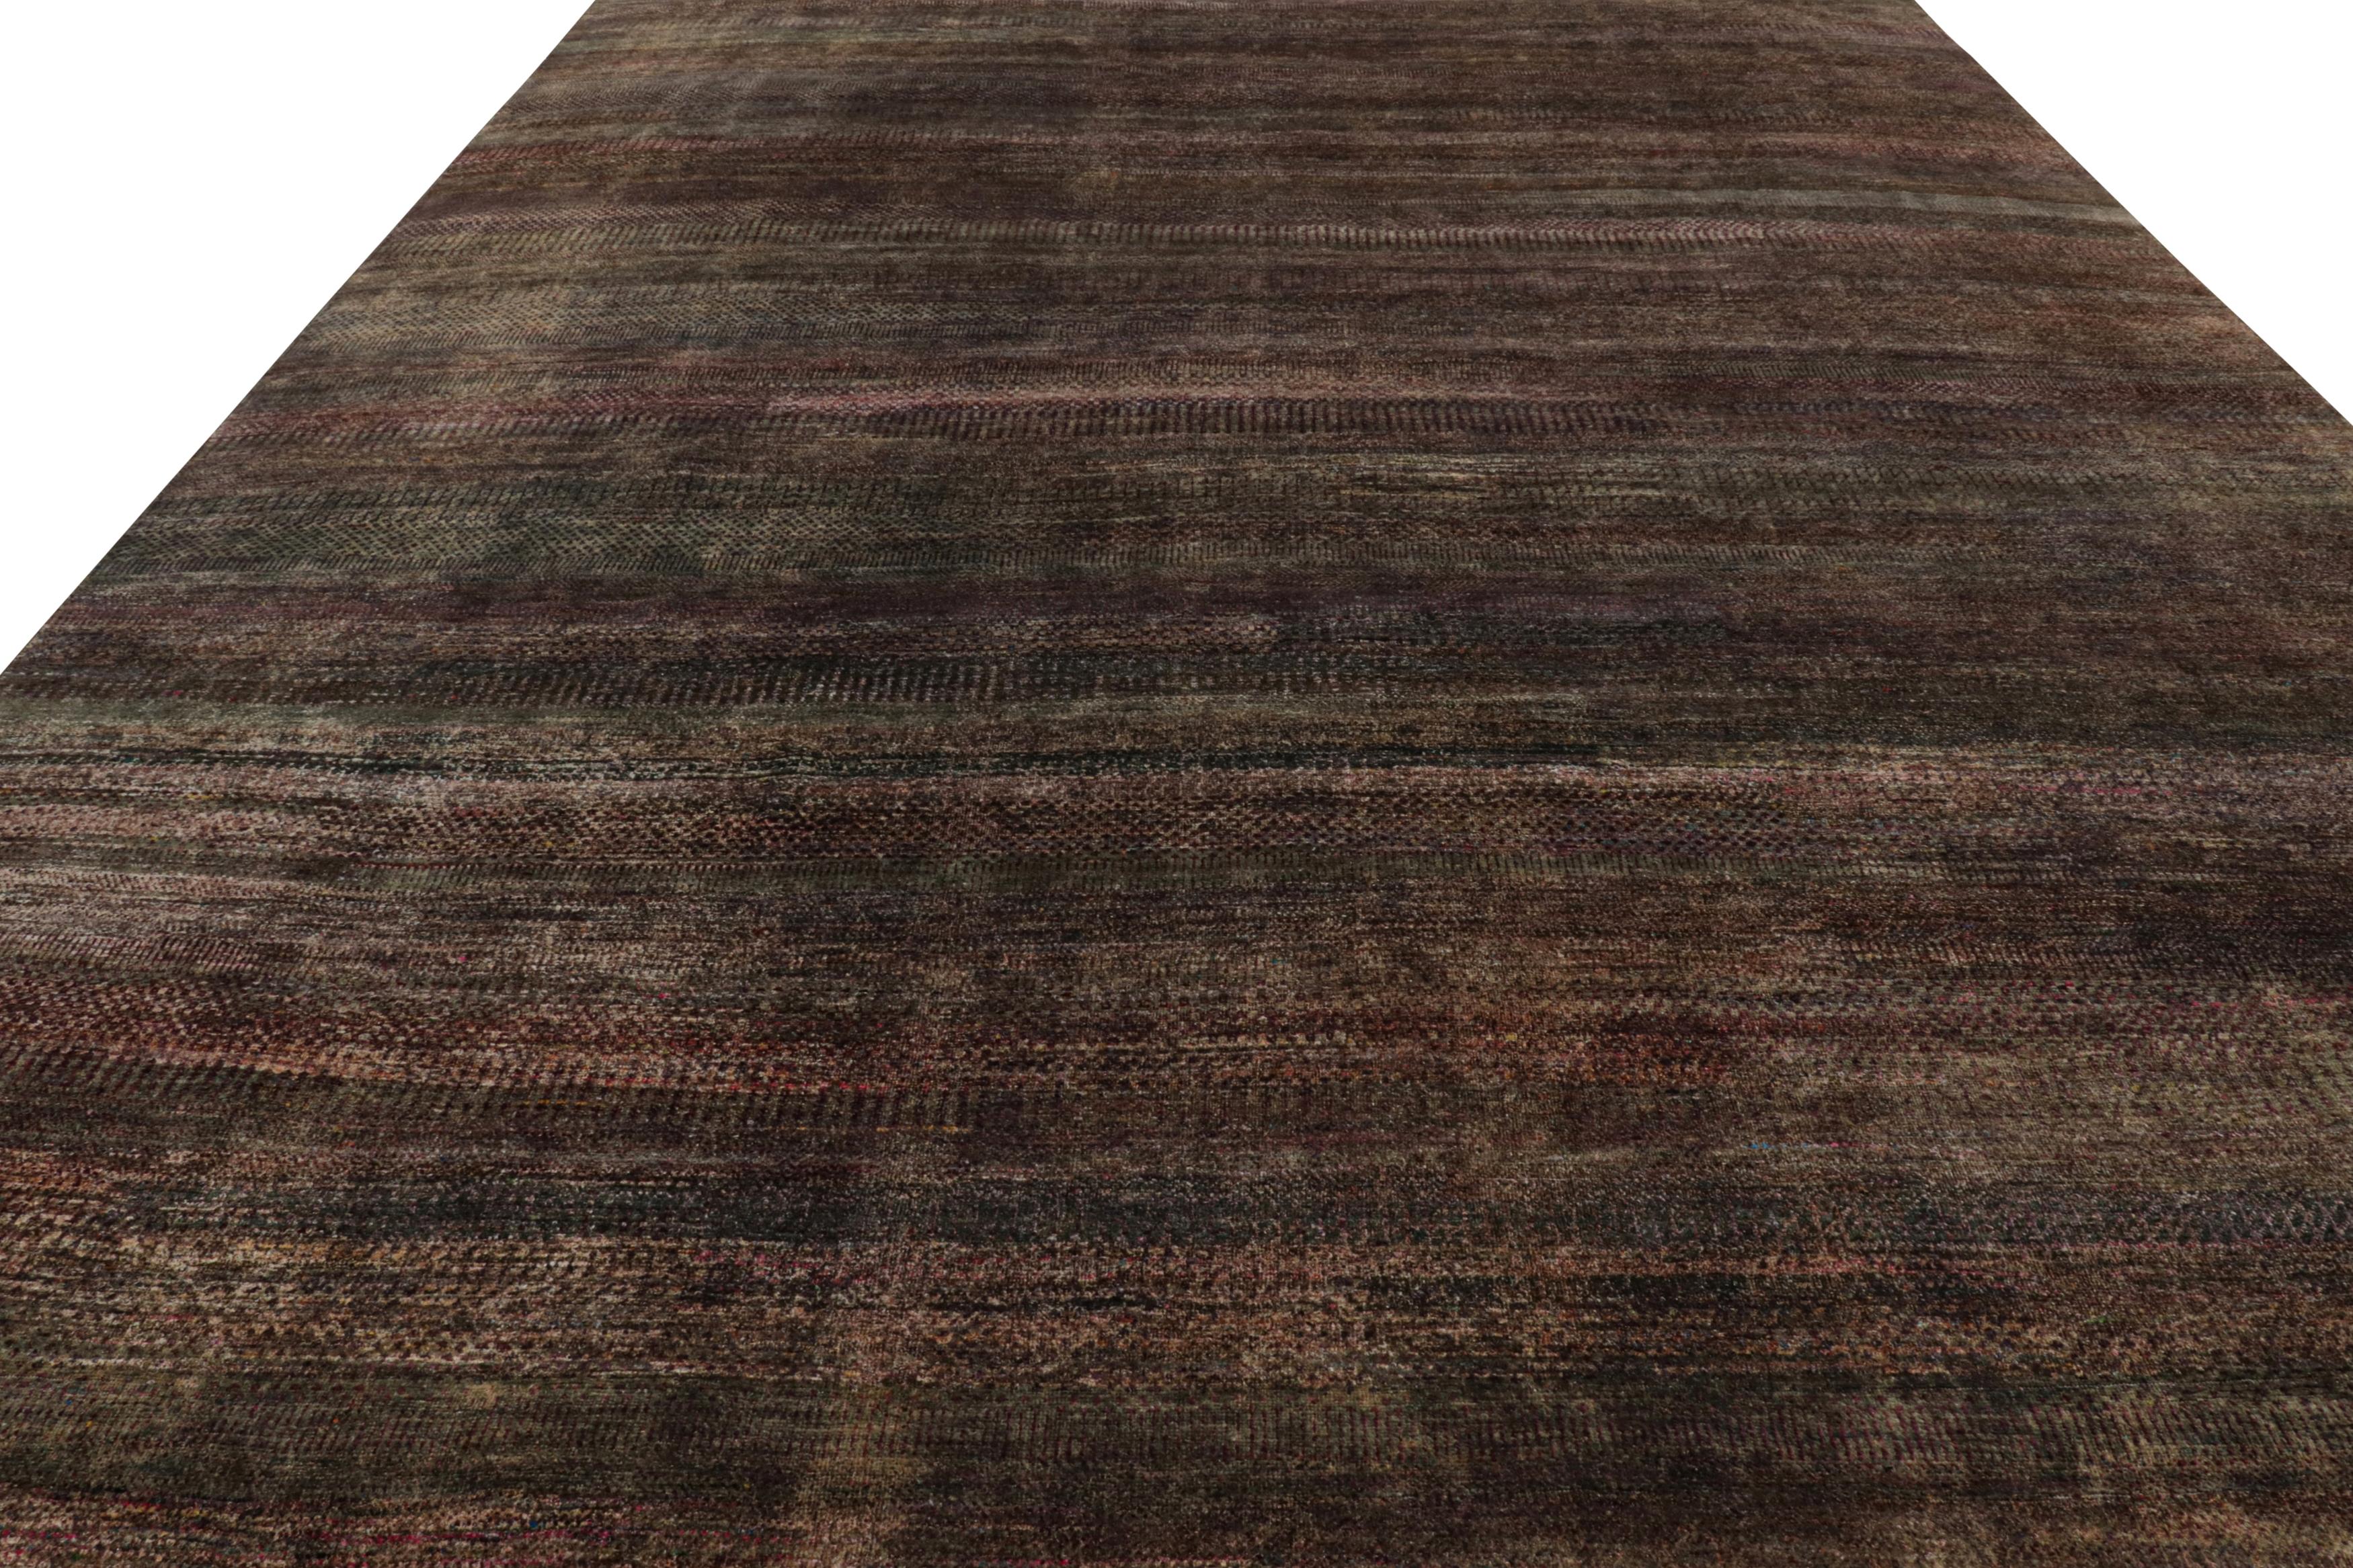 Rug & Kilim’s Modern Textural Rug in Tones of Plum and Green In New Condition For Sale In Long Island City, NY